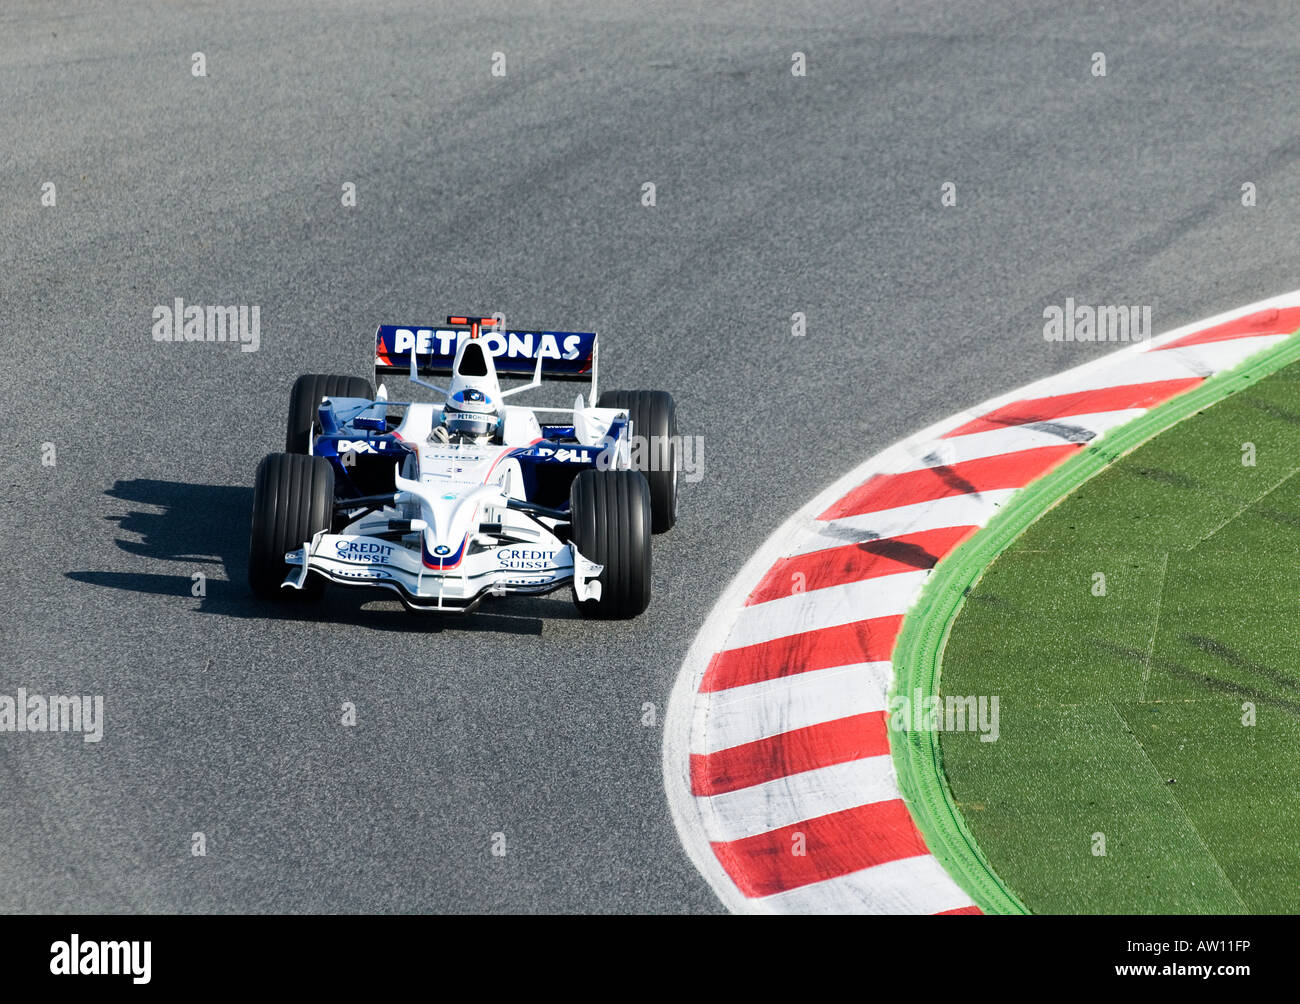 Nick Heidfeld (GER) in the BMW Sauber F1 08 Racecar during Formula 1 testing sessions,in Feb. 2008 Stock Photo